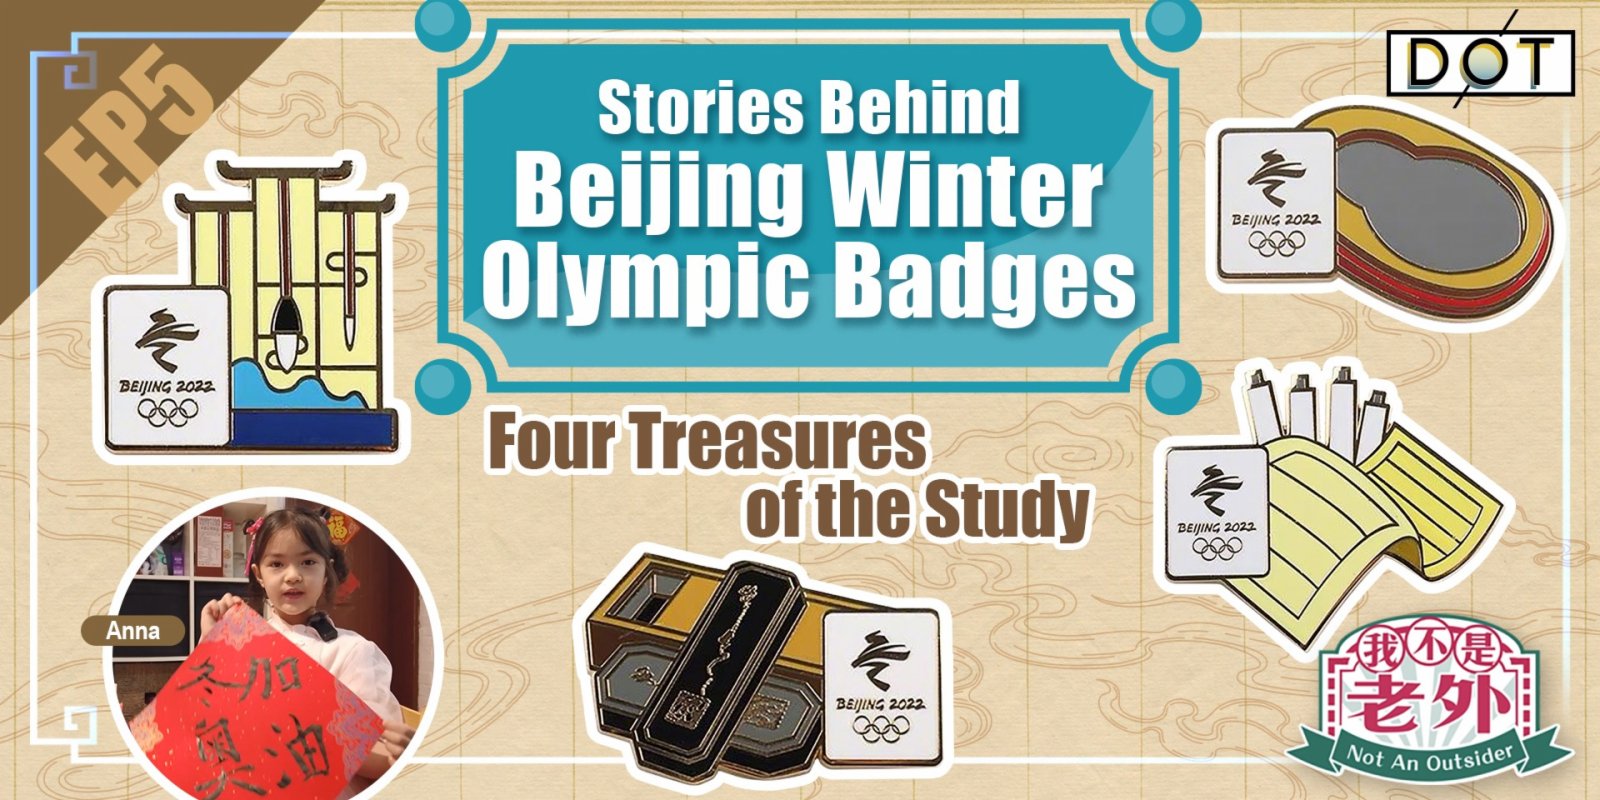 Not An Outsider | Stories behind Beijing Winter Olympic badges (EP5): Finnish girl introduces Four Treasures of Study